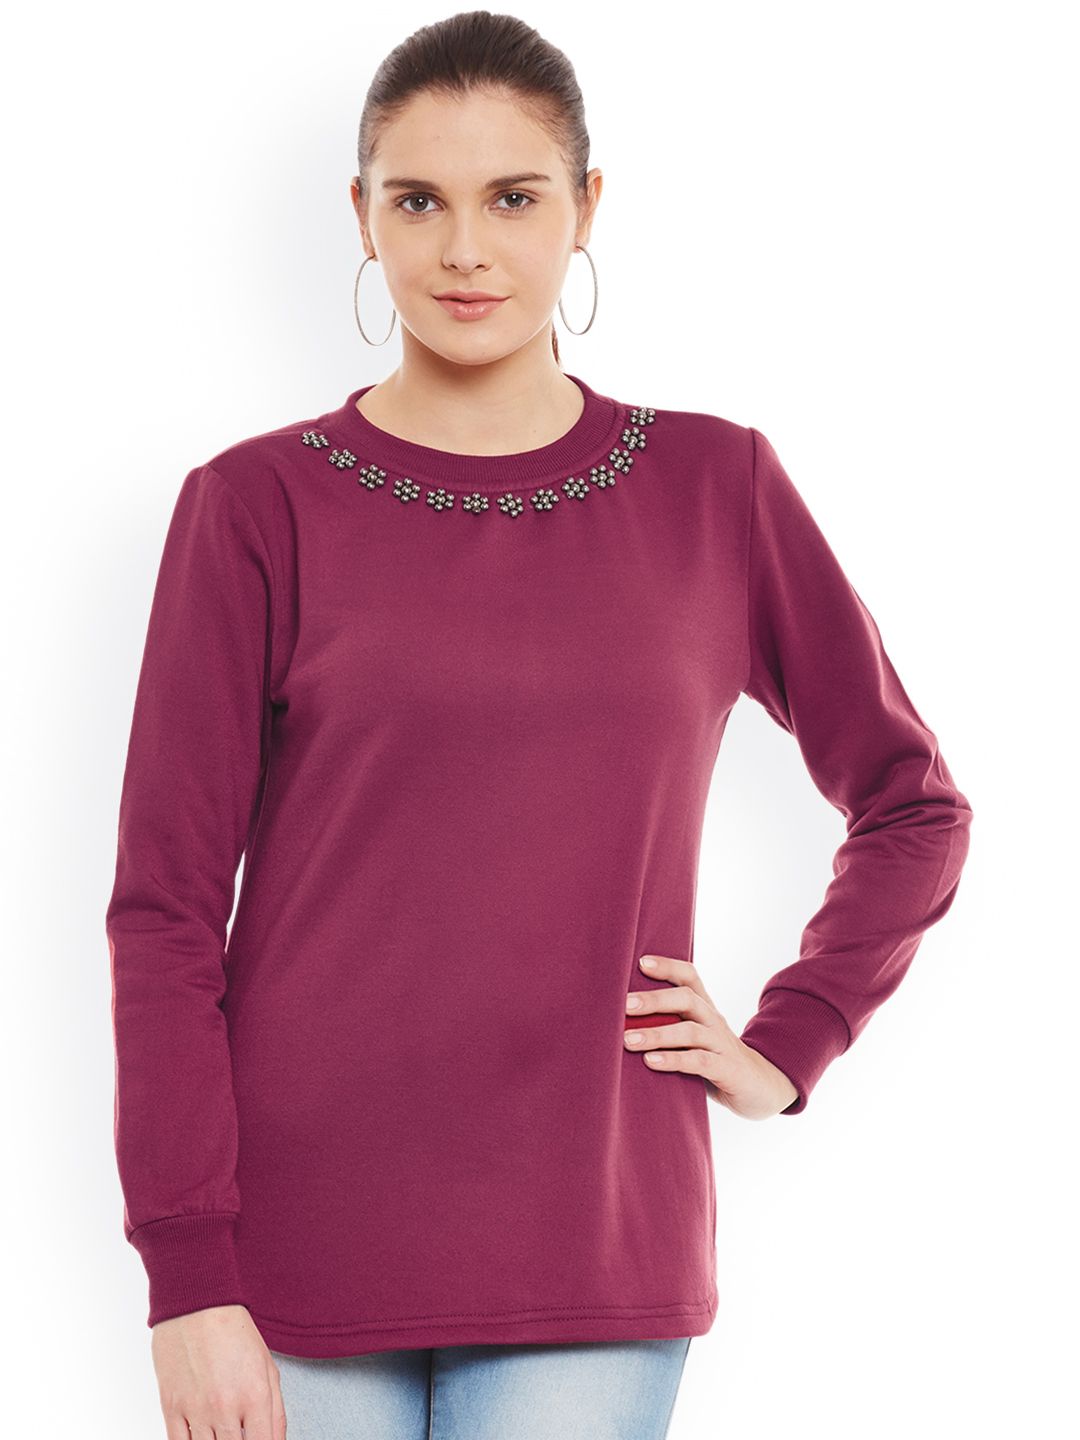 Belle Fille Magenta Sweatshirt with Embellished Detail Price in India